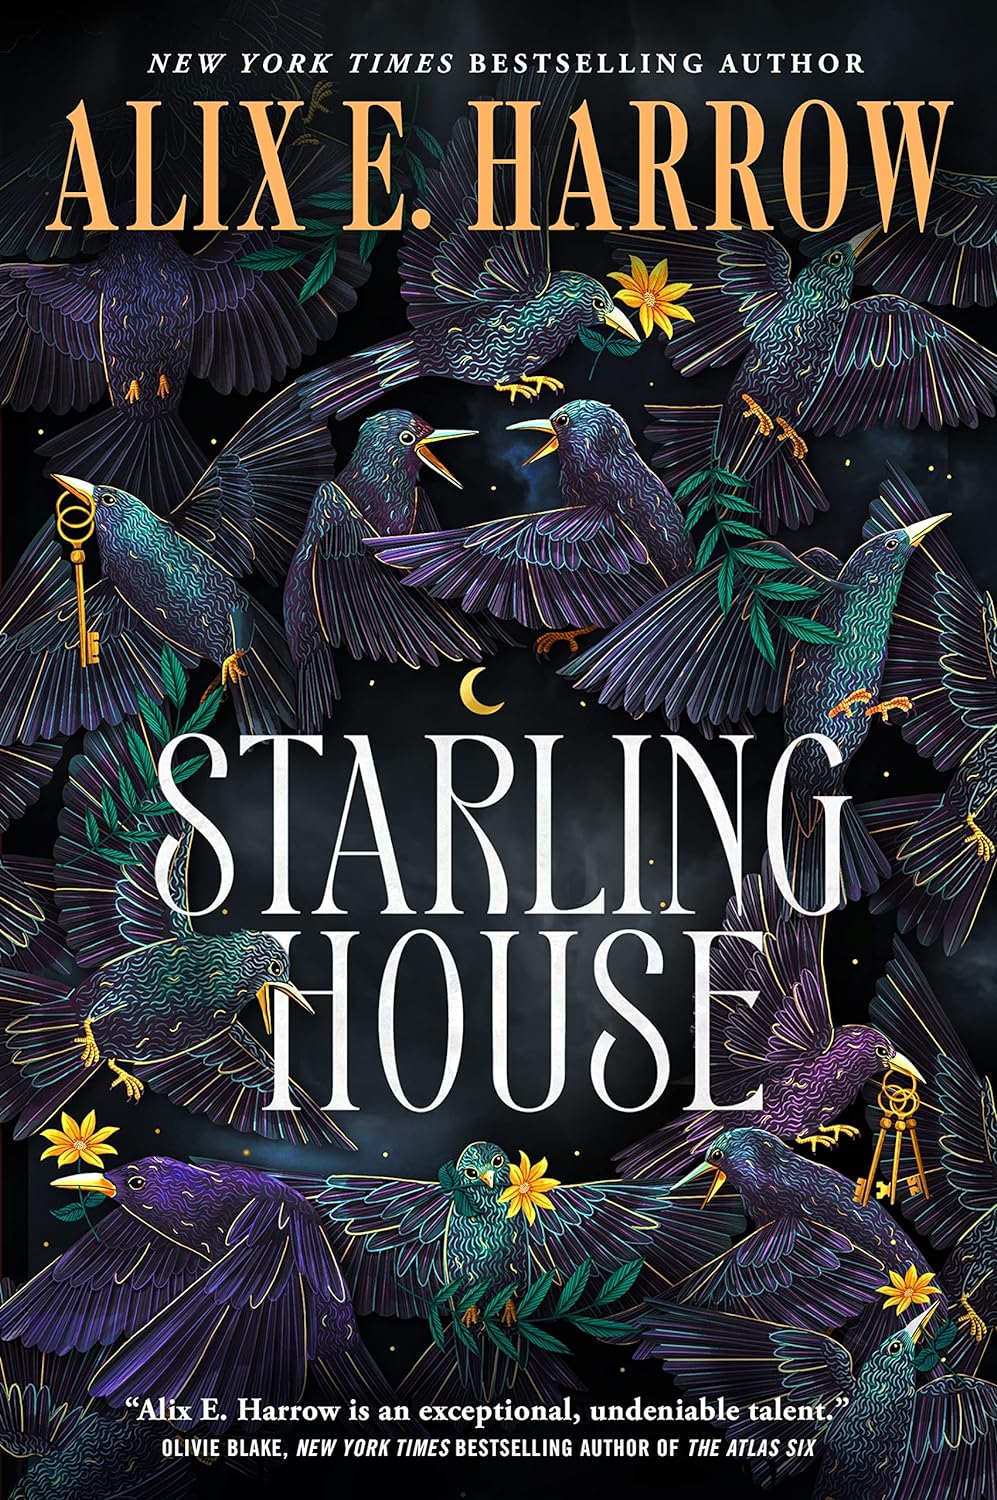 Image for "Starling House"